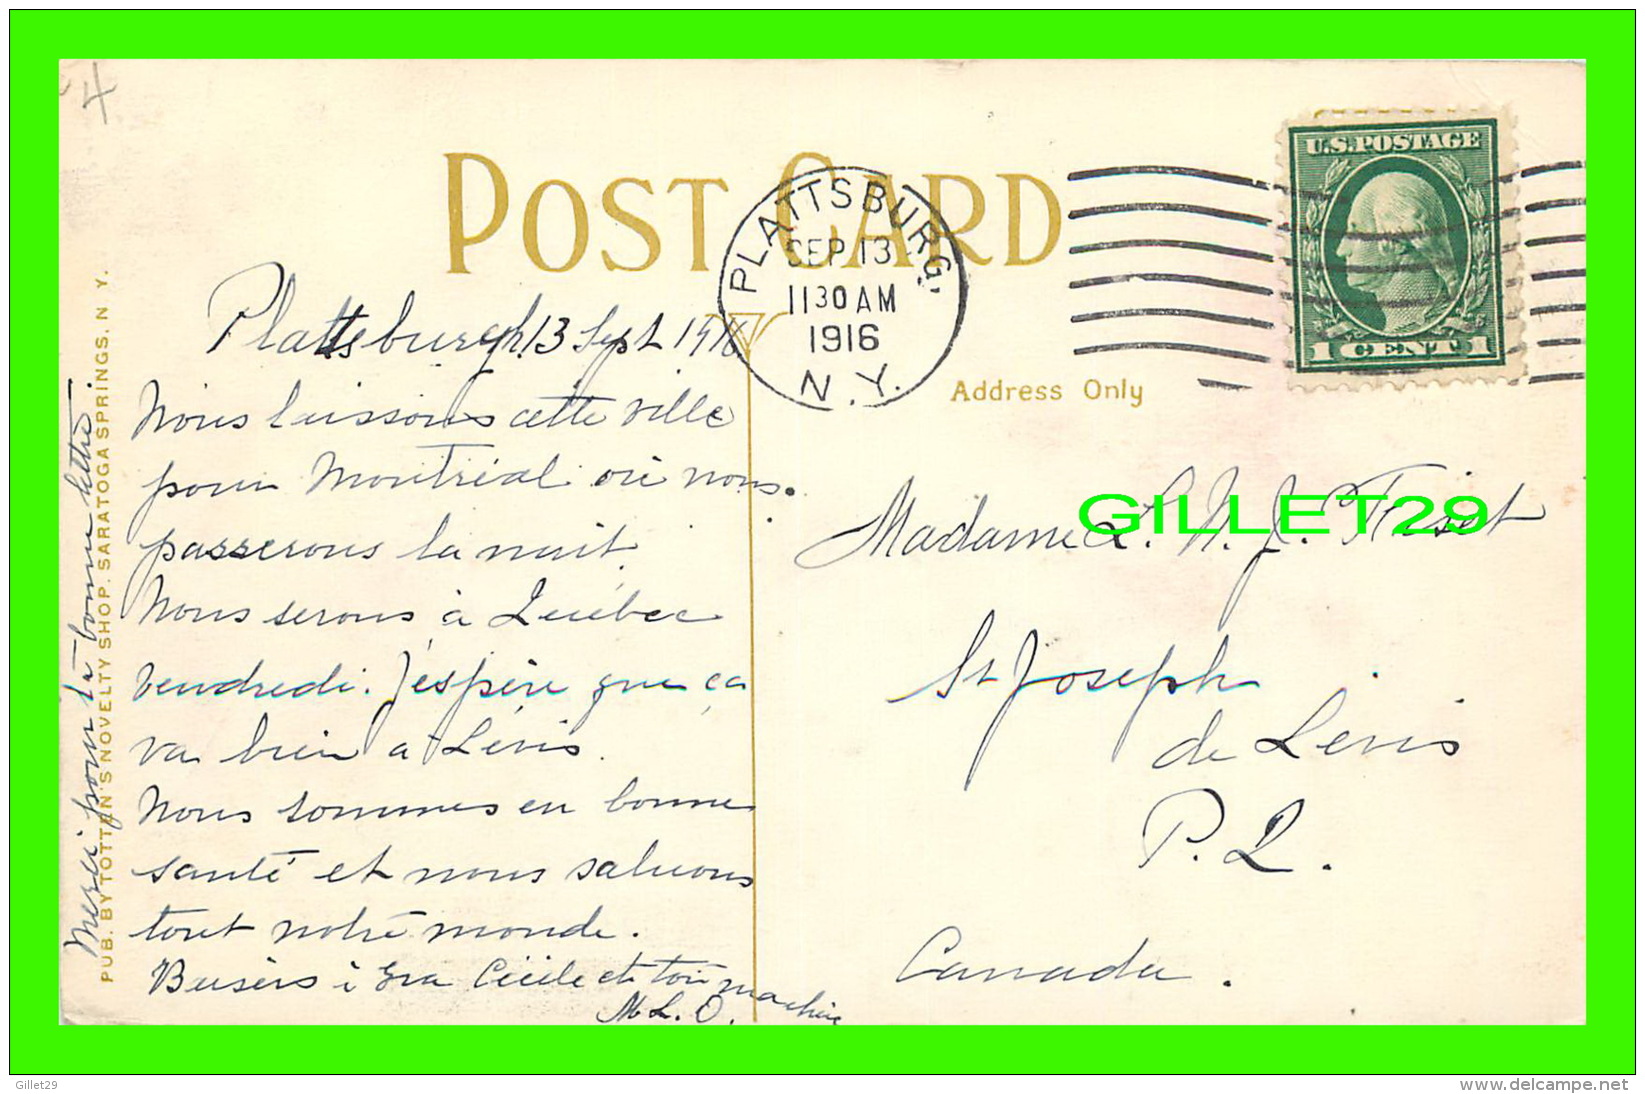 SARATOGA SPRINGS, NY - HOTEL AMERICAN - ANIMATED -  TRAVEL IN 1916 - PUB. BY TOTTEN'S NOVELTY SHOP - - Saratoga Springs